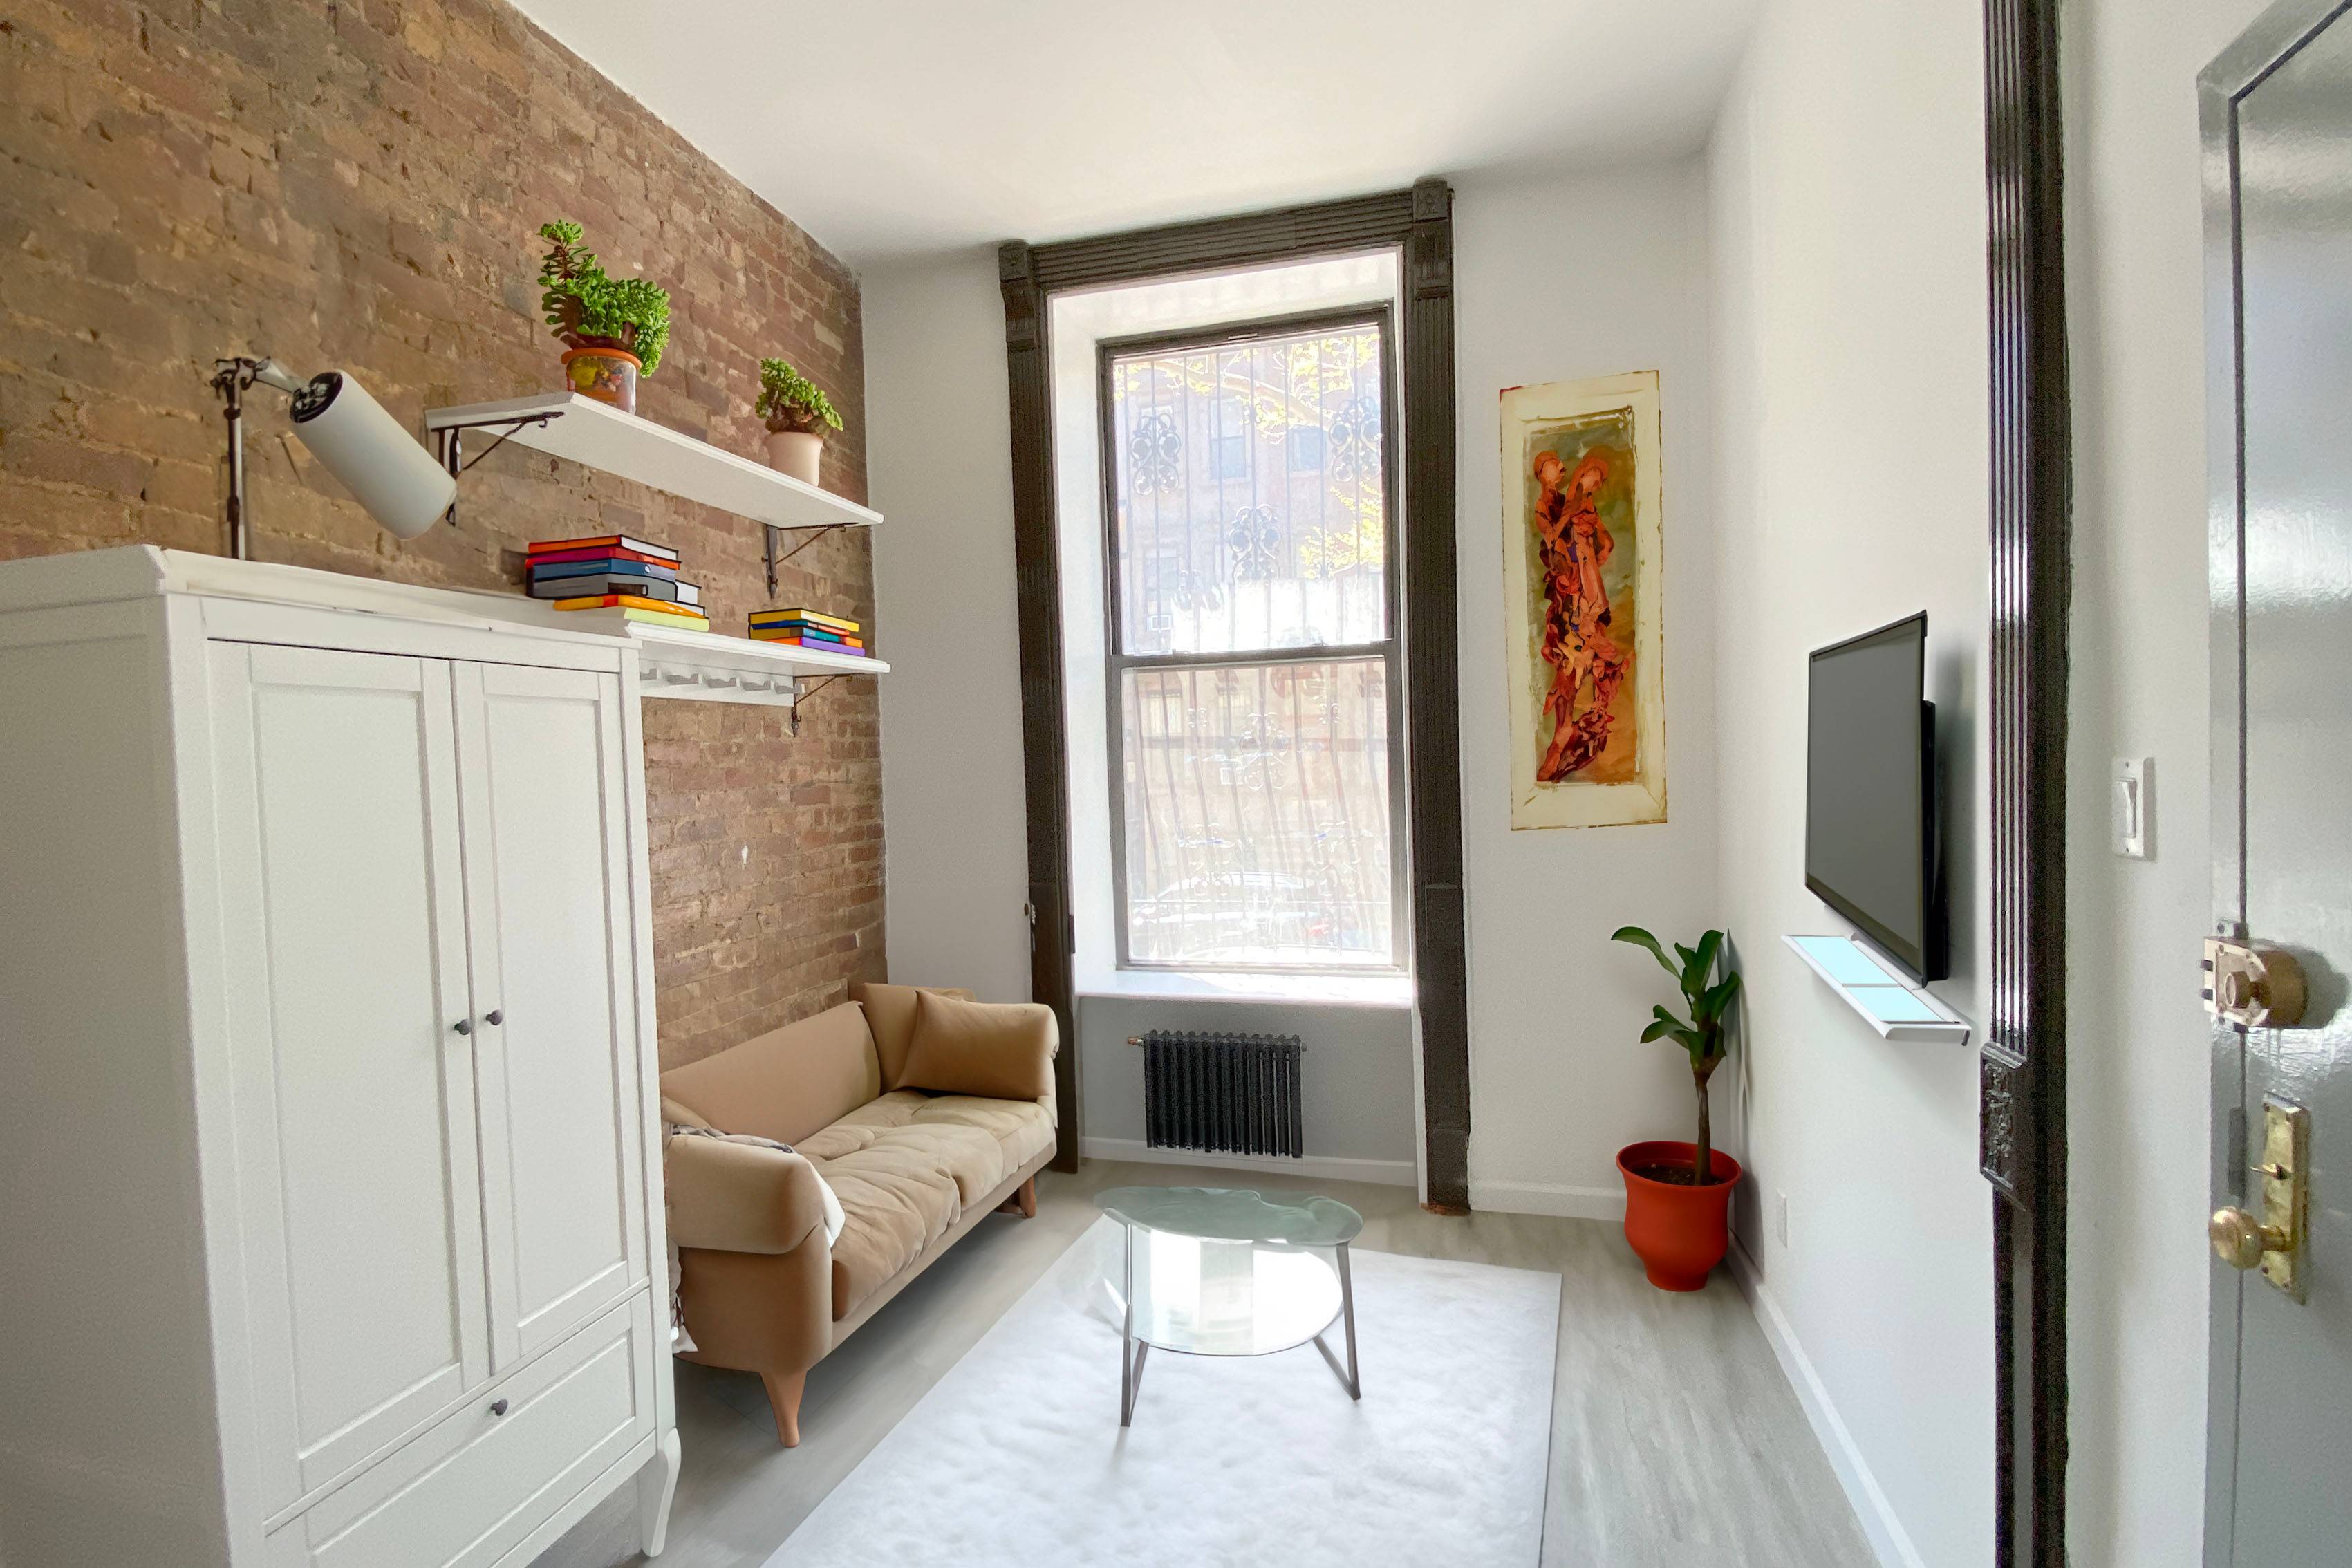 Mini Studio With a Loft Bed Available in a Newly Renovated Brownstone.